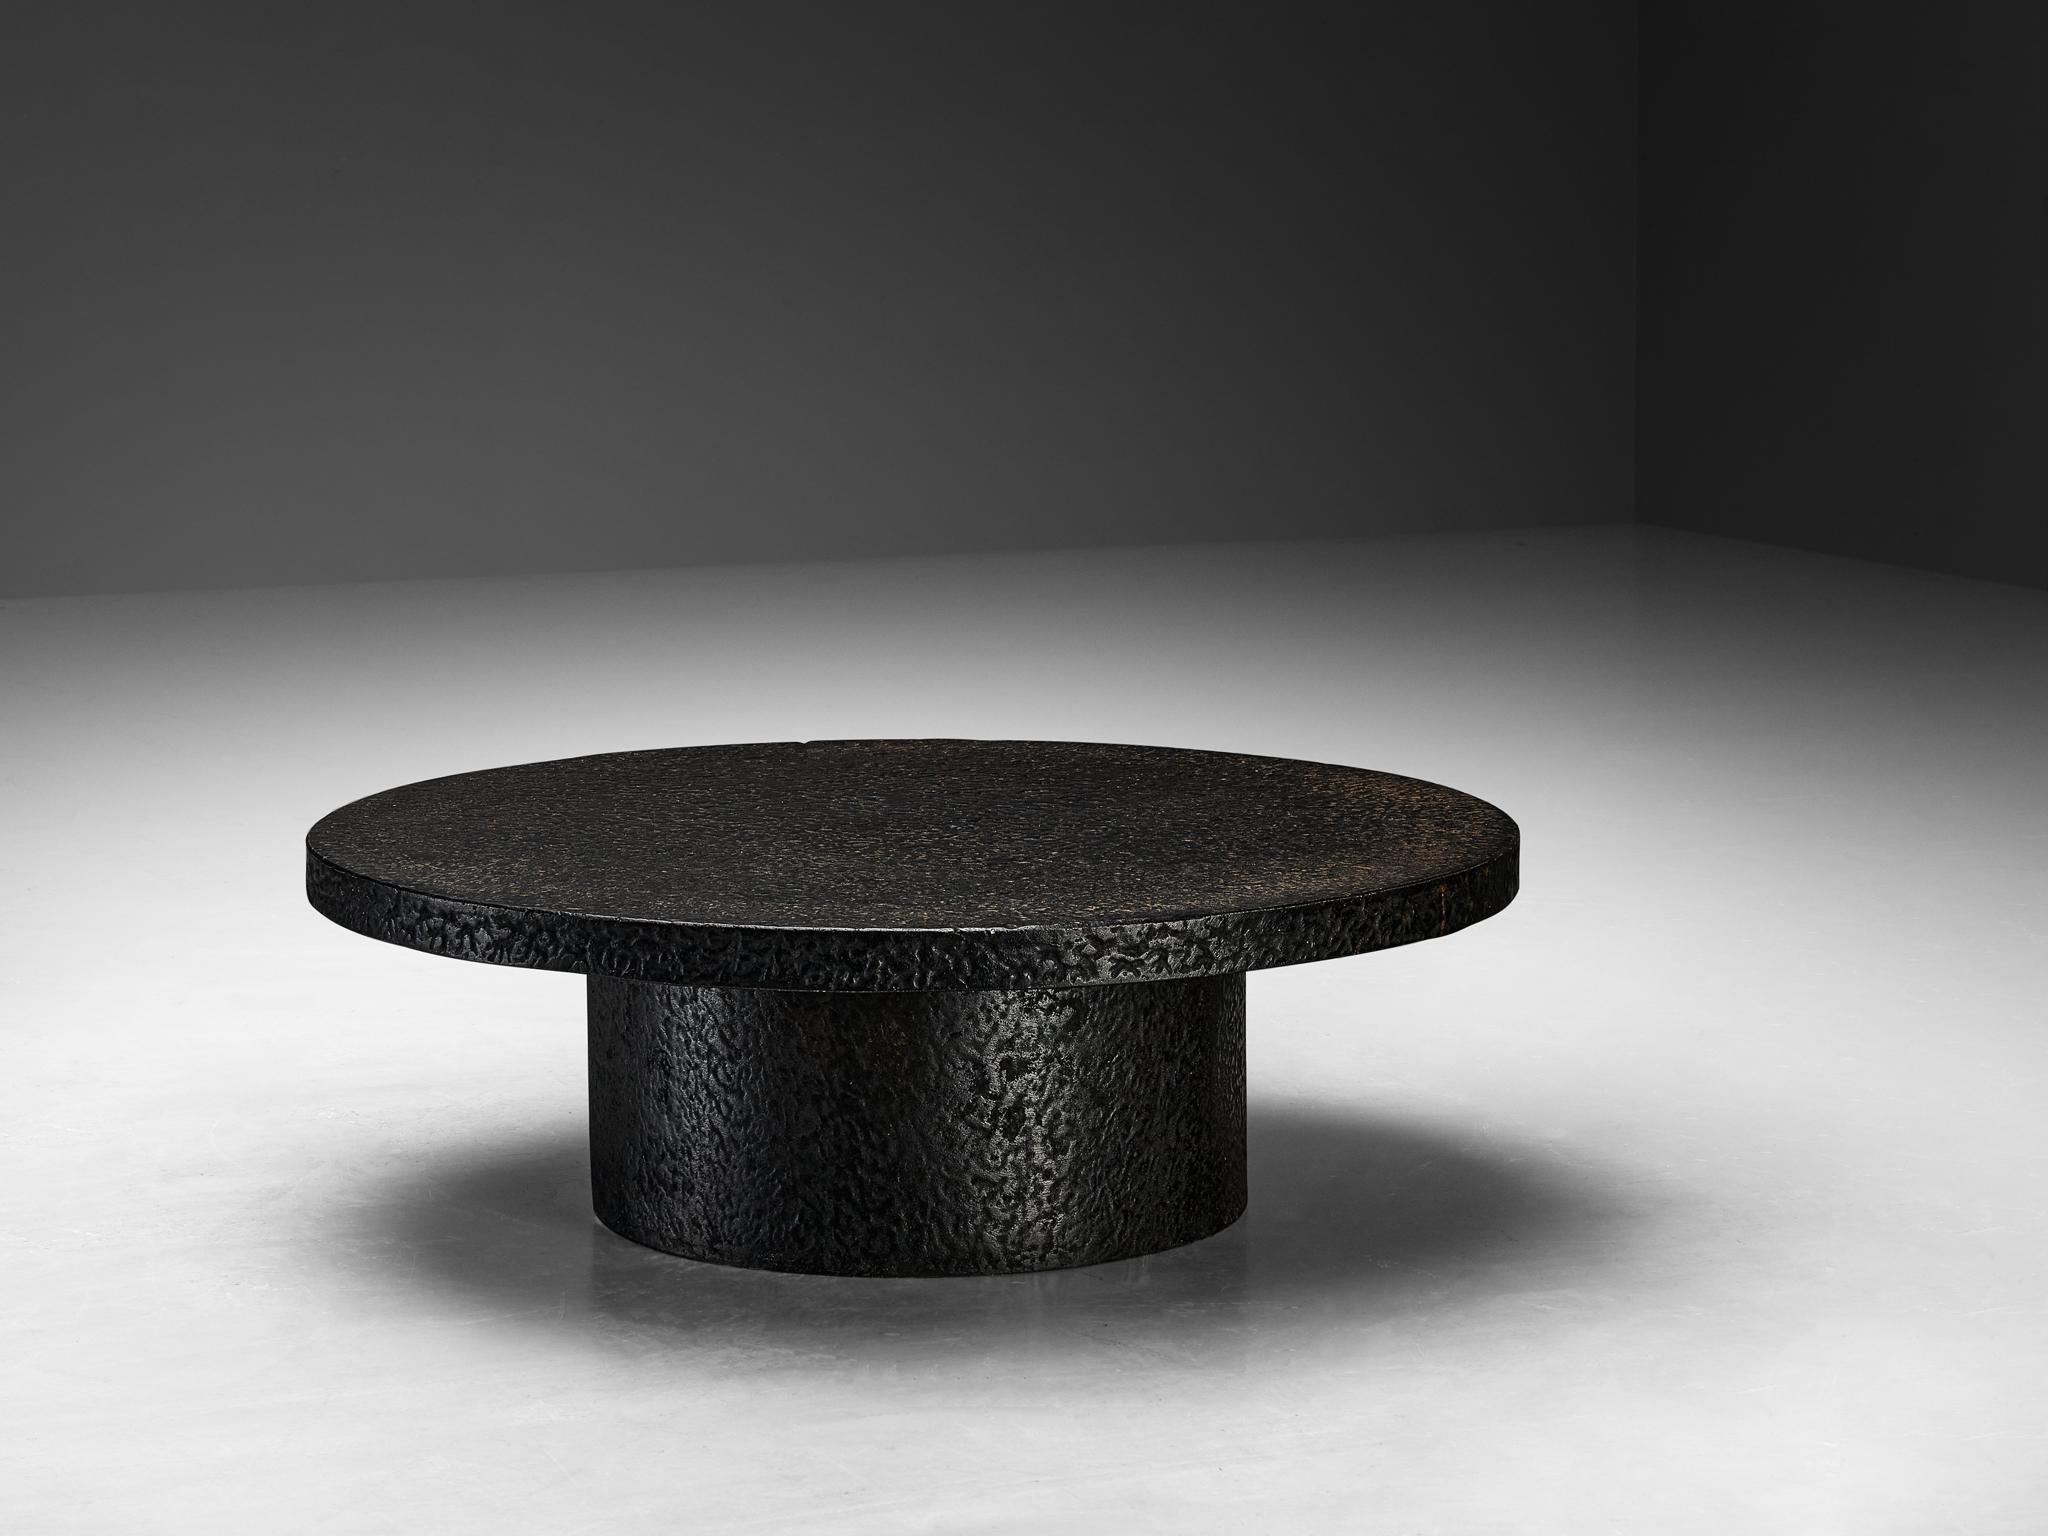 Cocktail table, resin, Northern-Europe, 1970s.

This deep black robust coffee or cocktail table is from the 1970s. The thick round top is supported by a similar but smaller round column. The whole construction is executed in resin which resembles